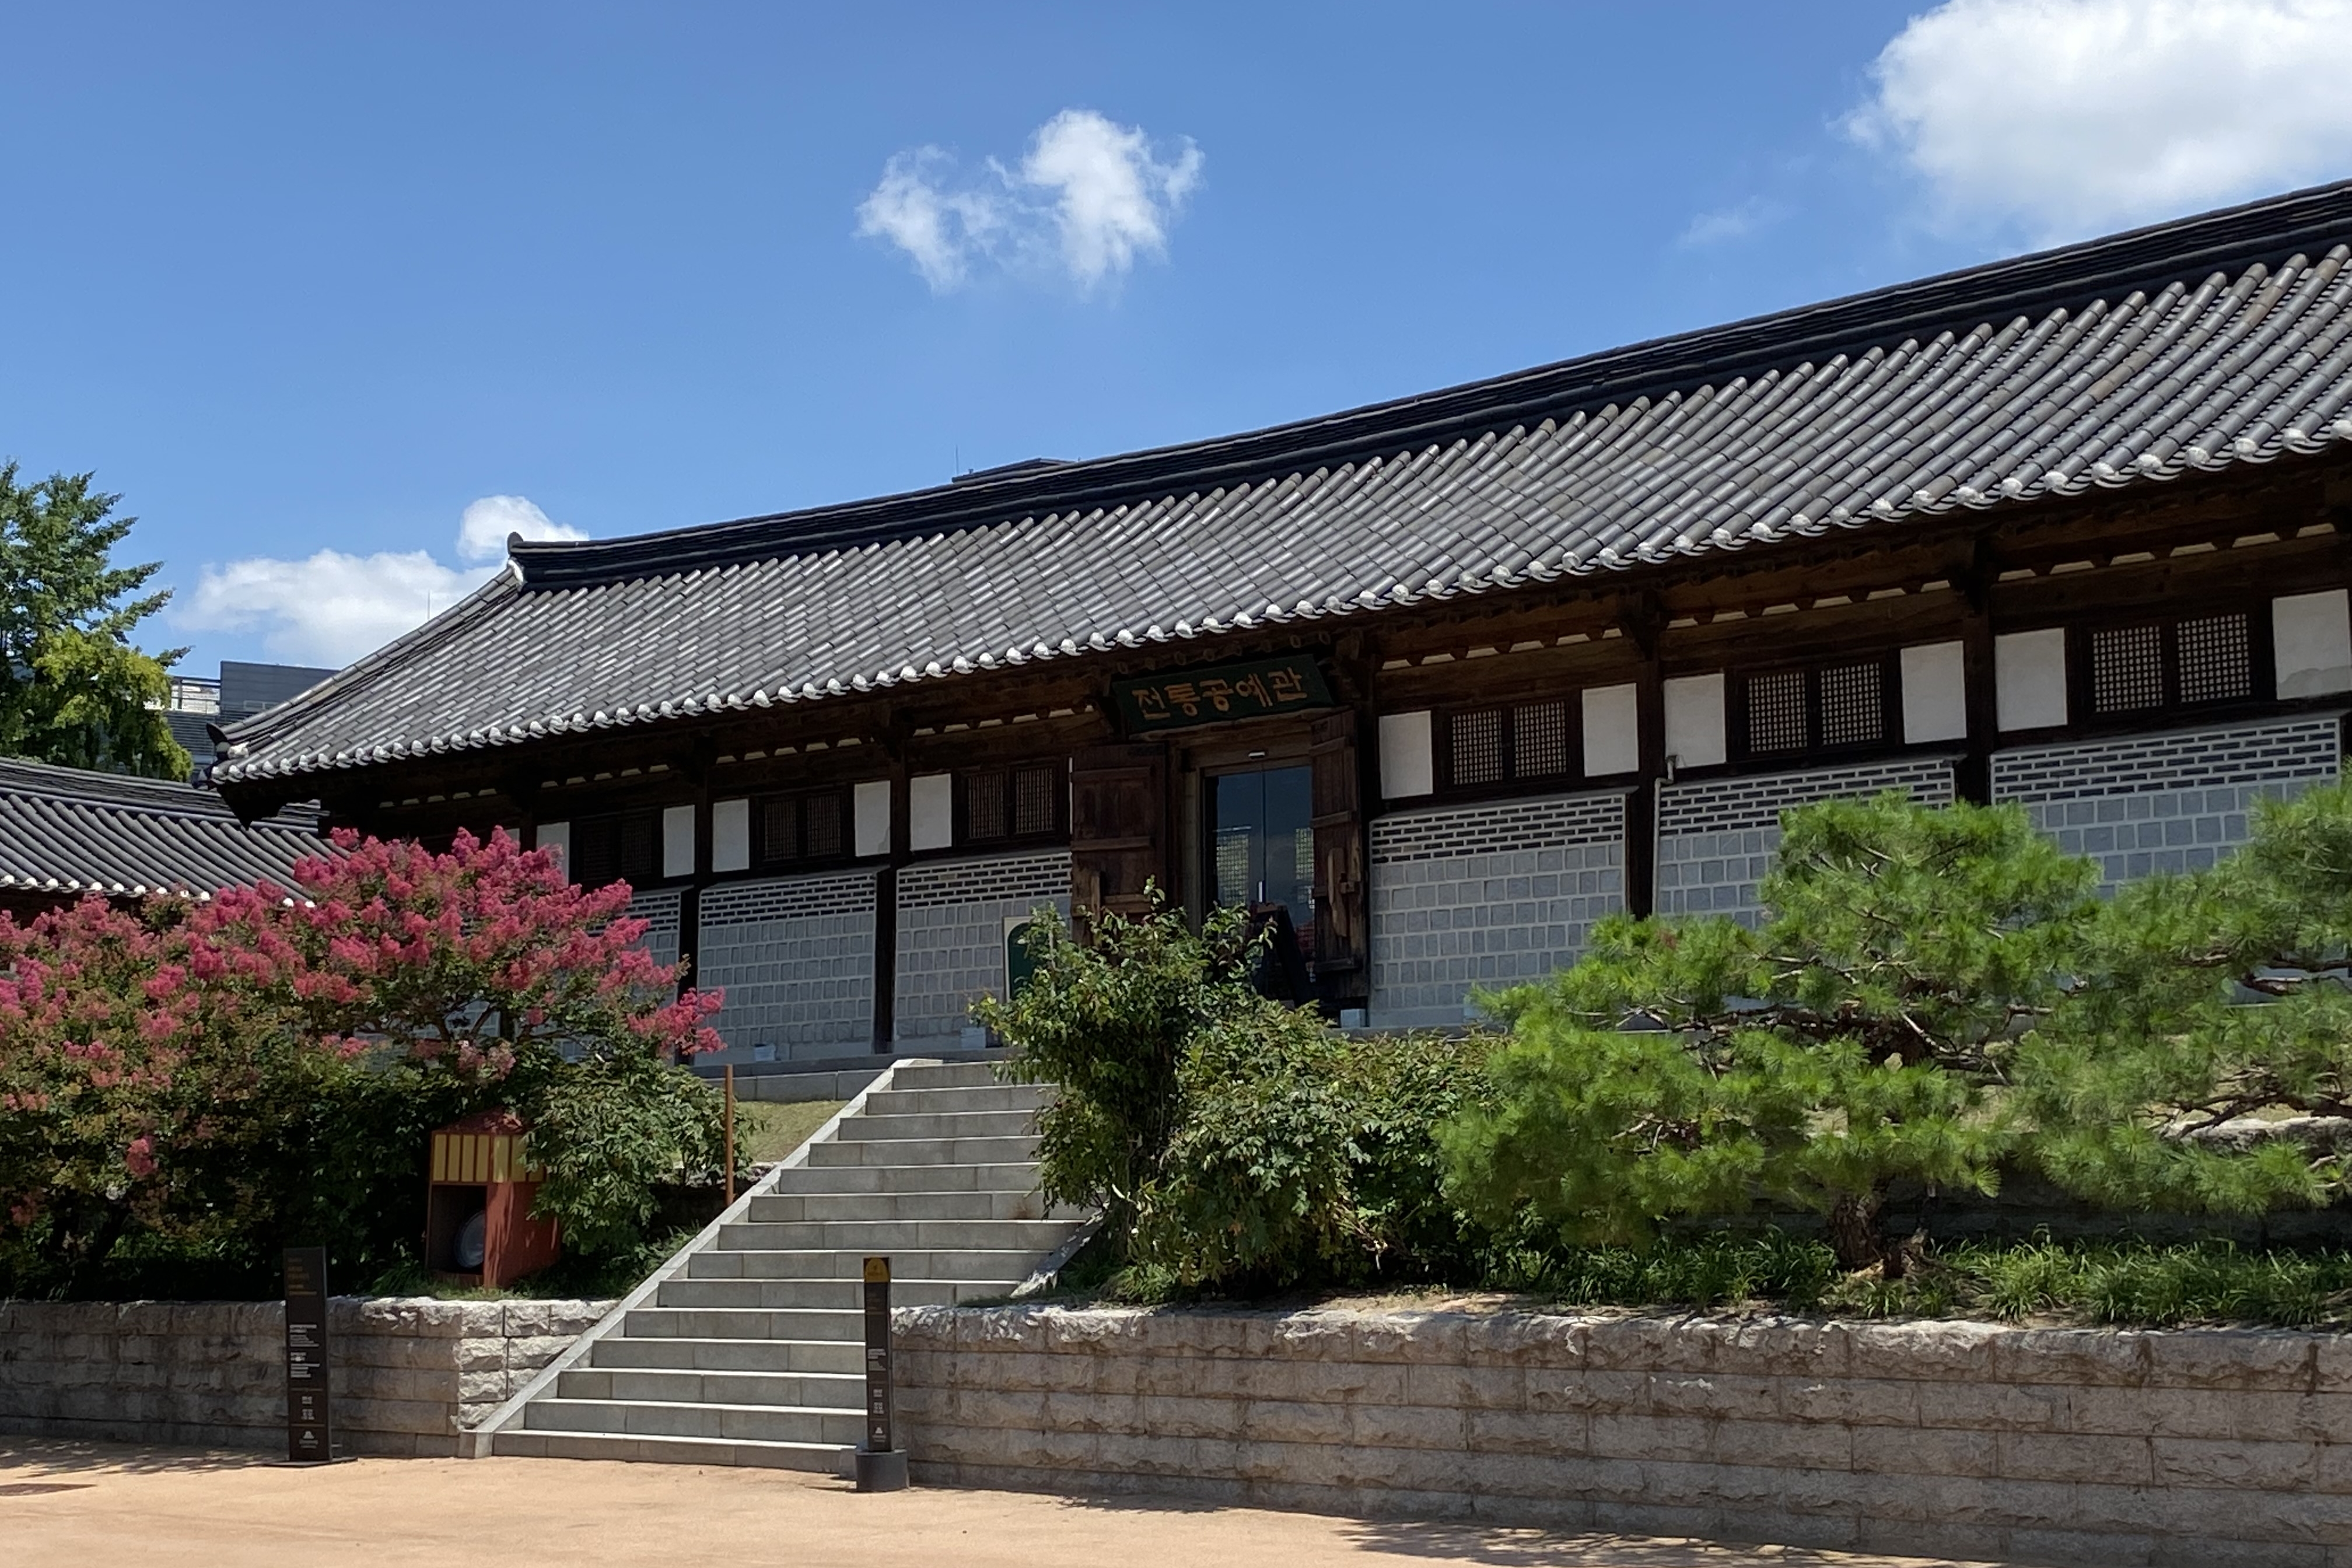 Namsangol Hanok Village4 : A craft hall in the form of a wide horizontal tiled-roofed house with stairs